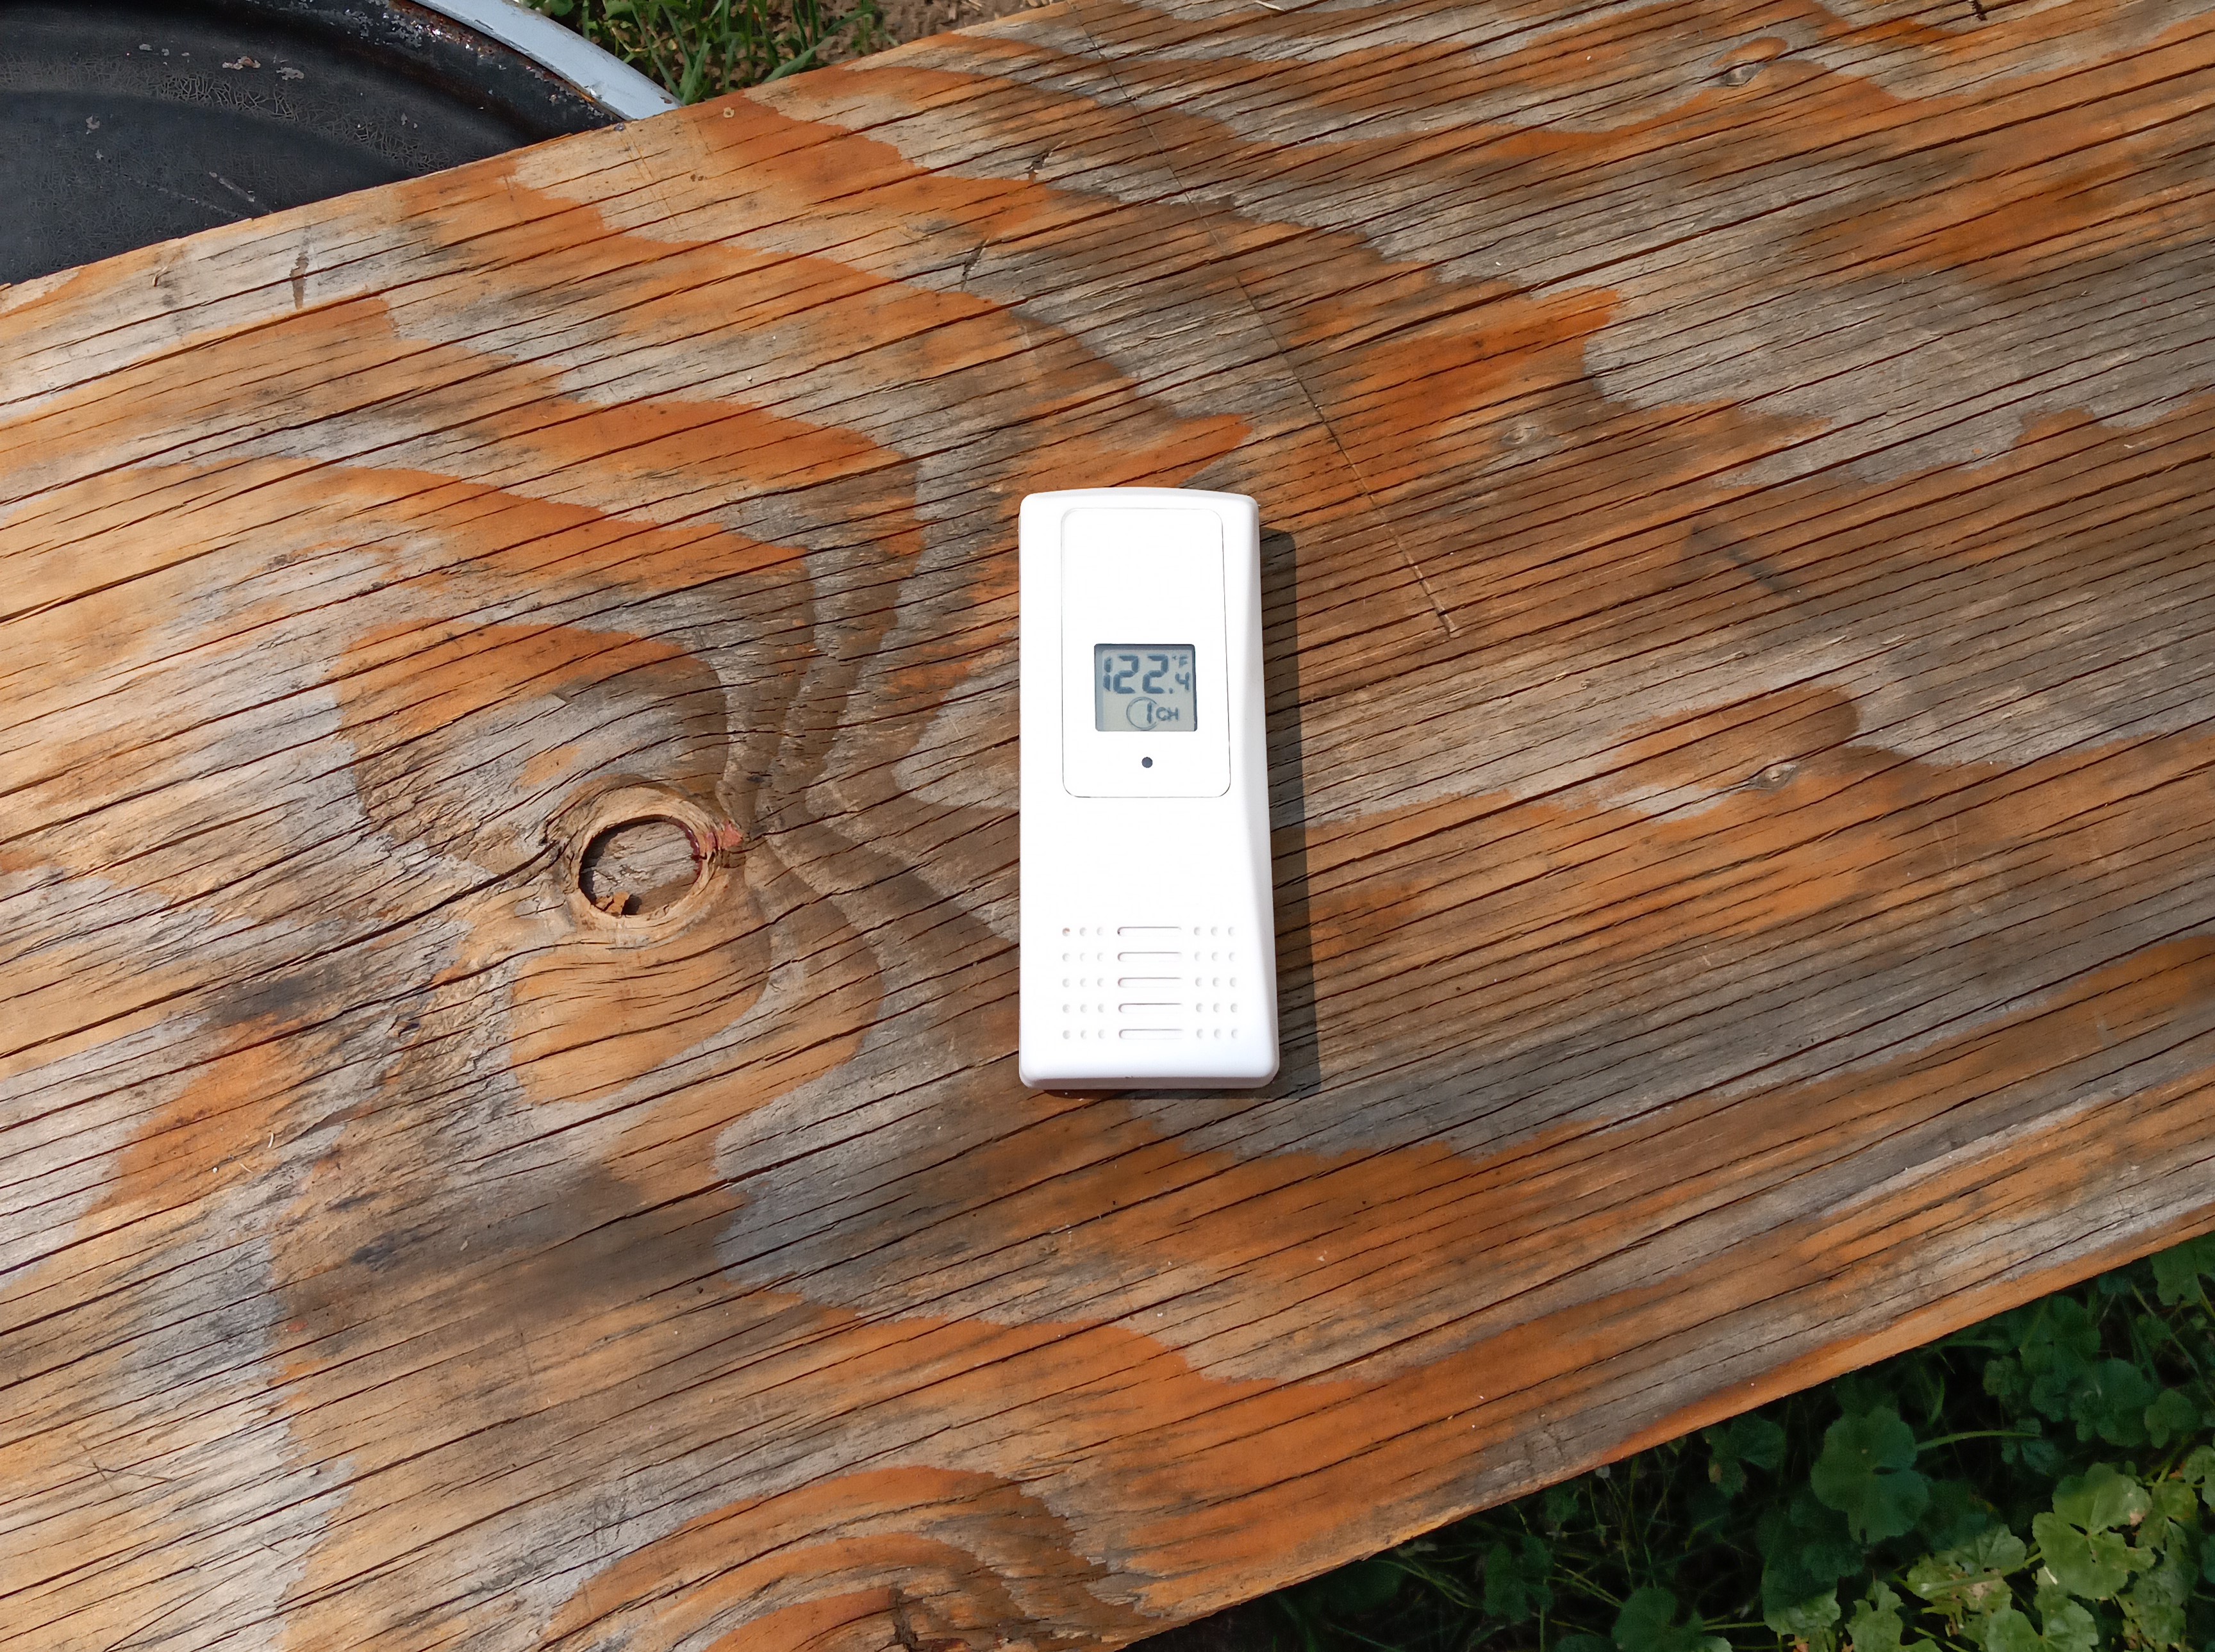 remote thermometer in sunlight displaying temp of 122.4degF